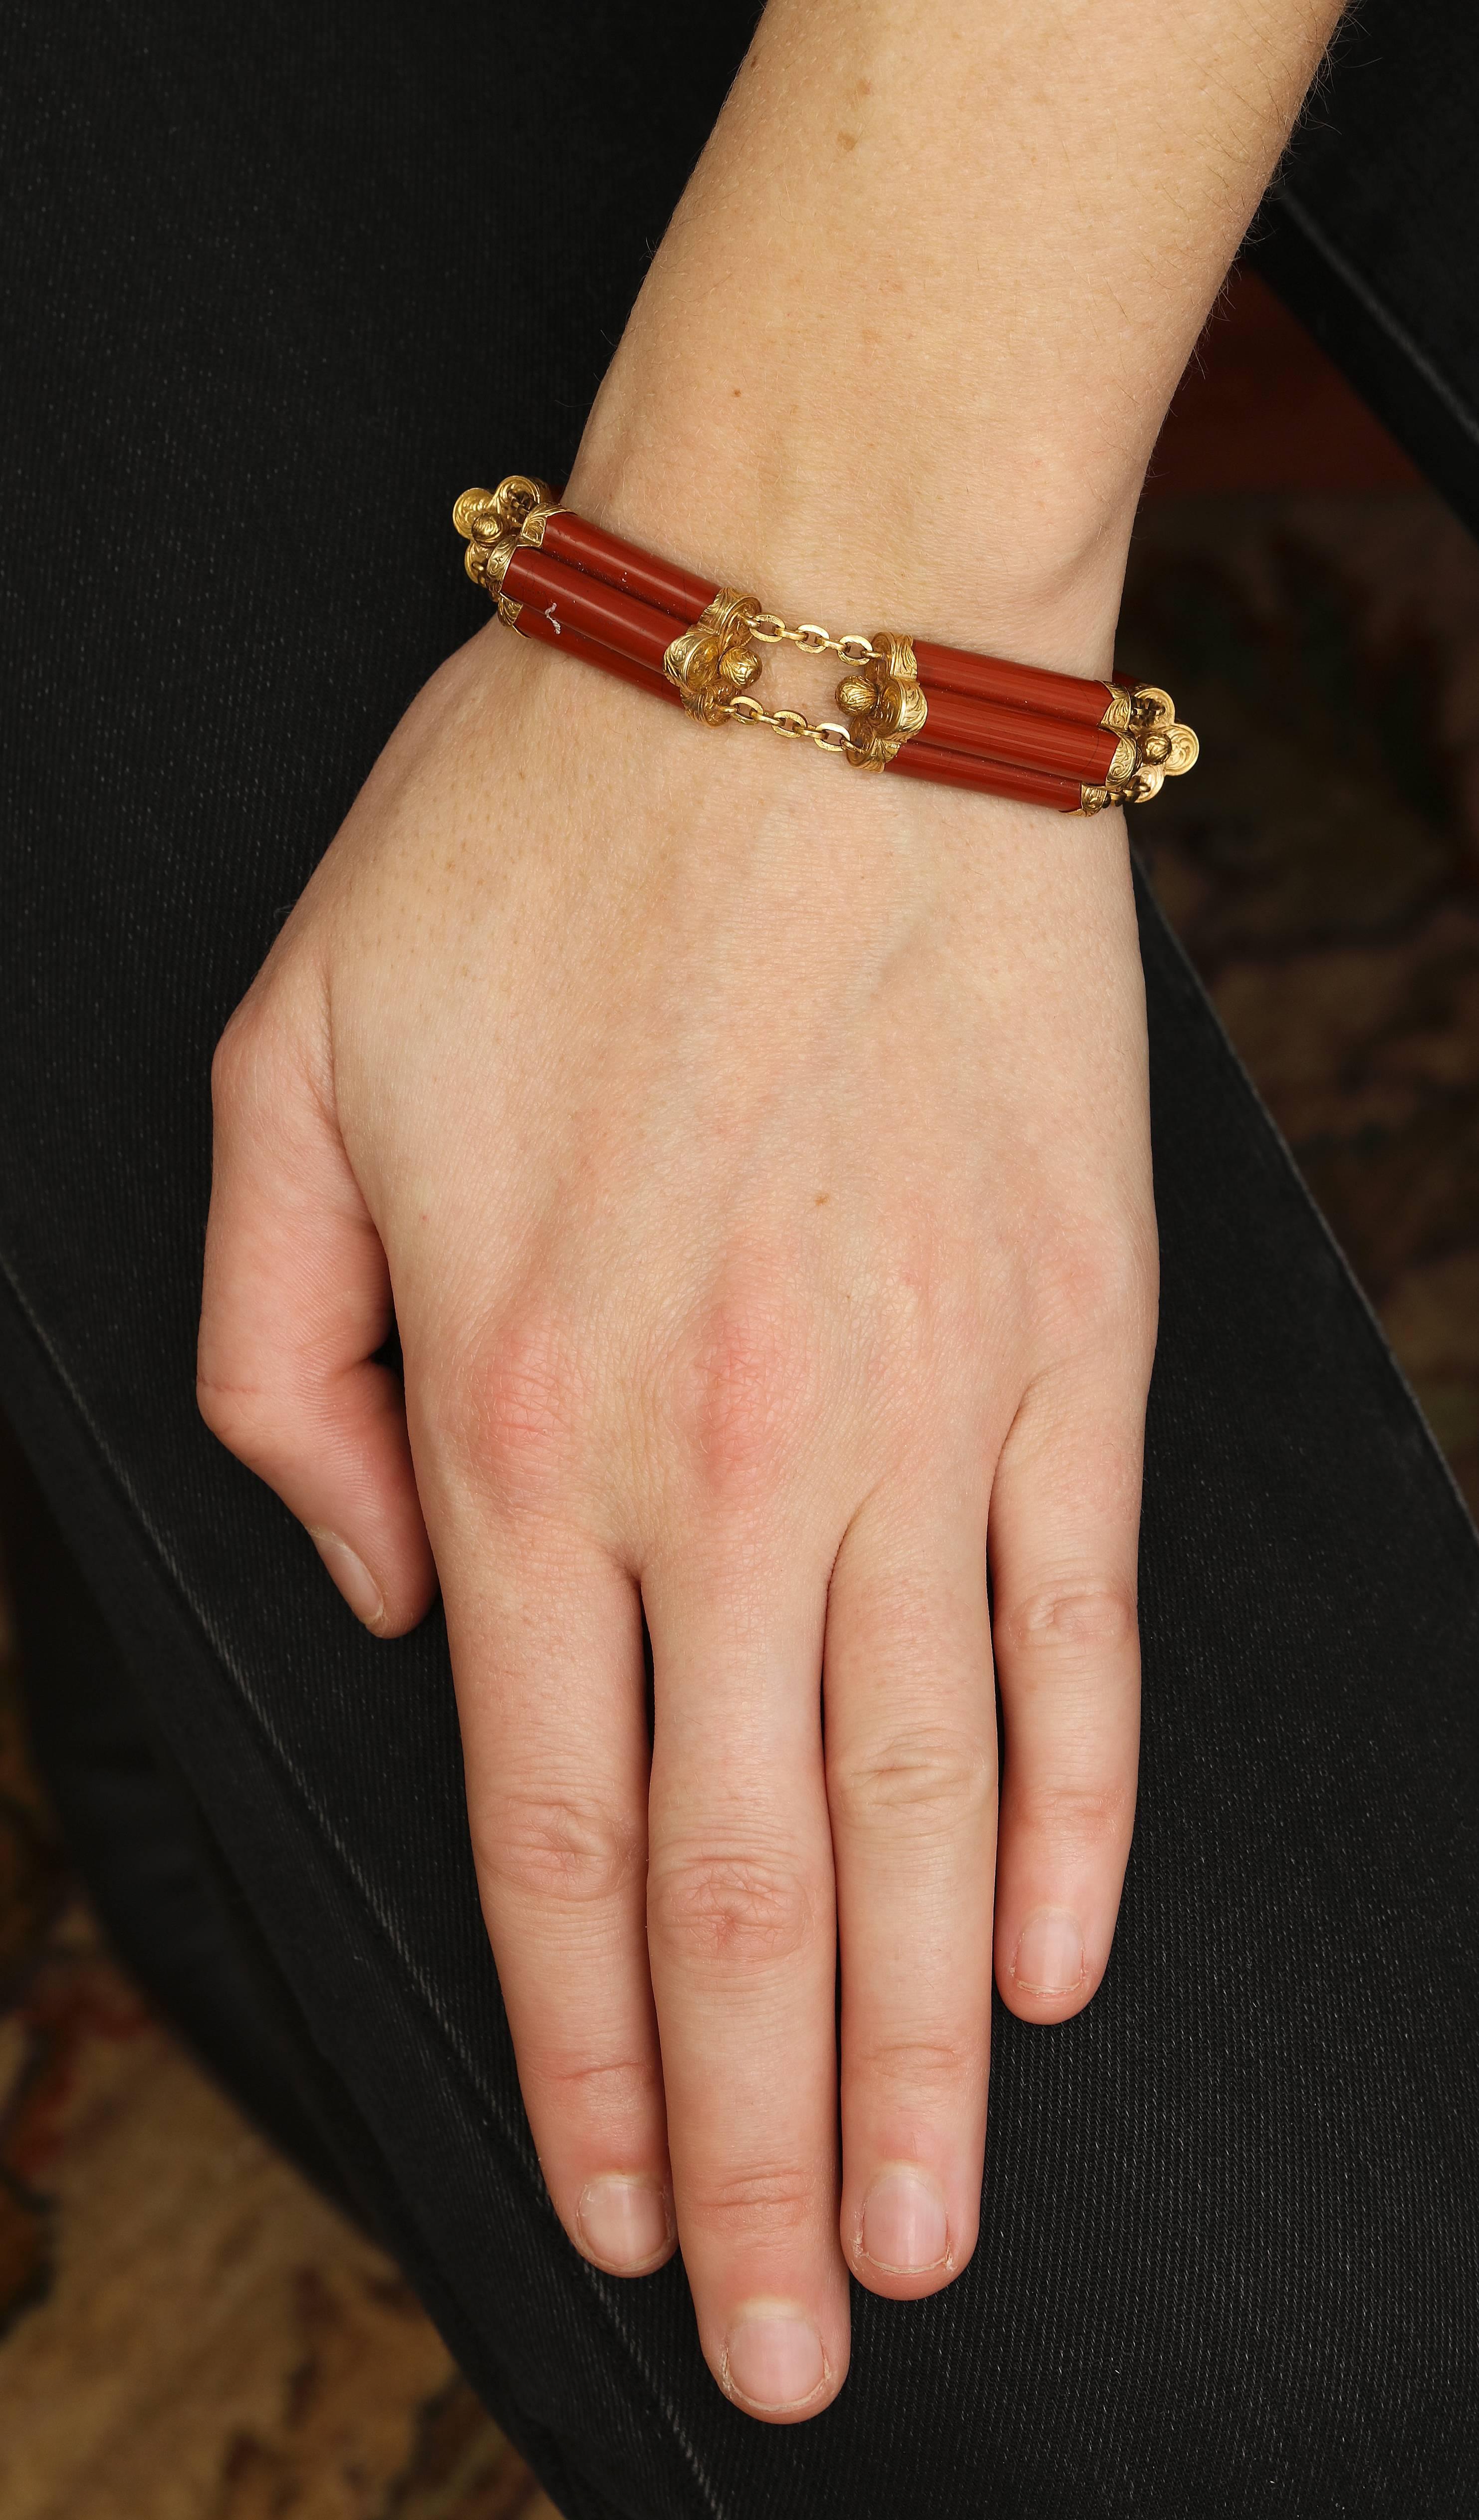 Women's Bright and Beautiful Scottish Red Jasper Bracelet with Gold Engraving